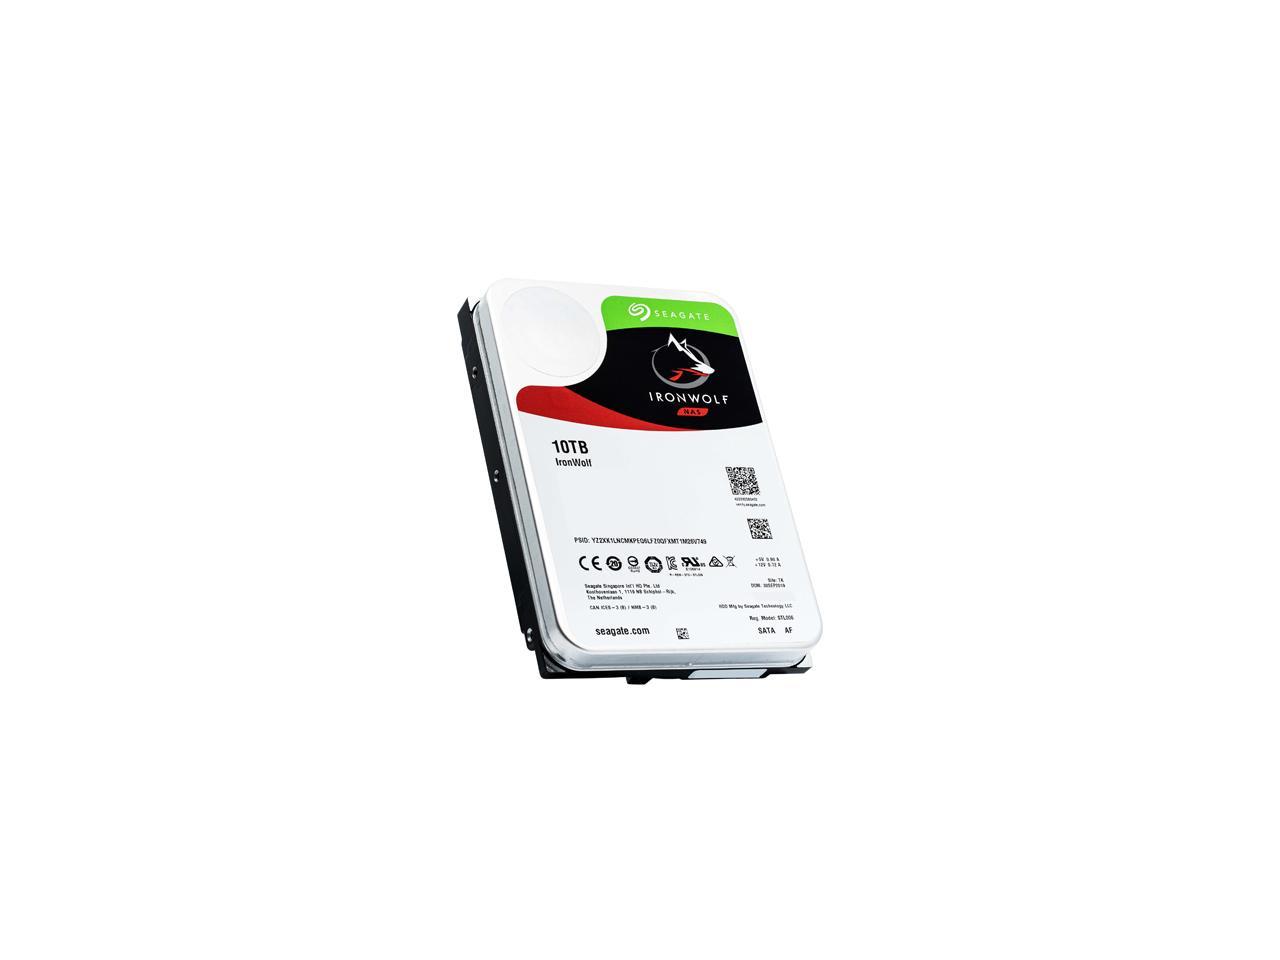 Seagate Ironwolf 10Tb Nas Hard Drive 7200 Rpm 256Mb Cache Sata 6.0Gb/S Cmr 3.5" Internal Hdd For Raid Network Attached Storage St10000Vn0008 - Oem